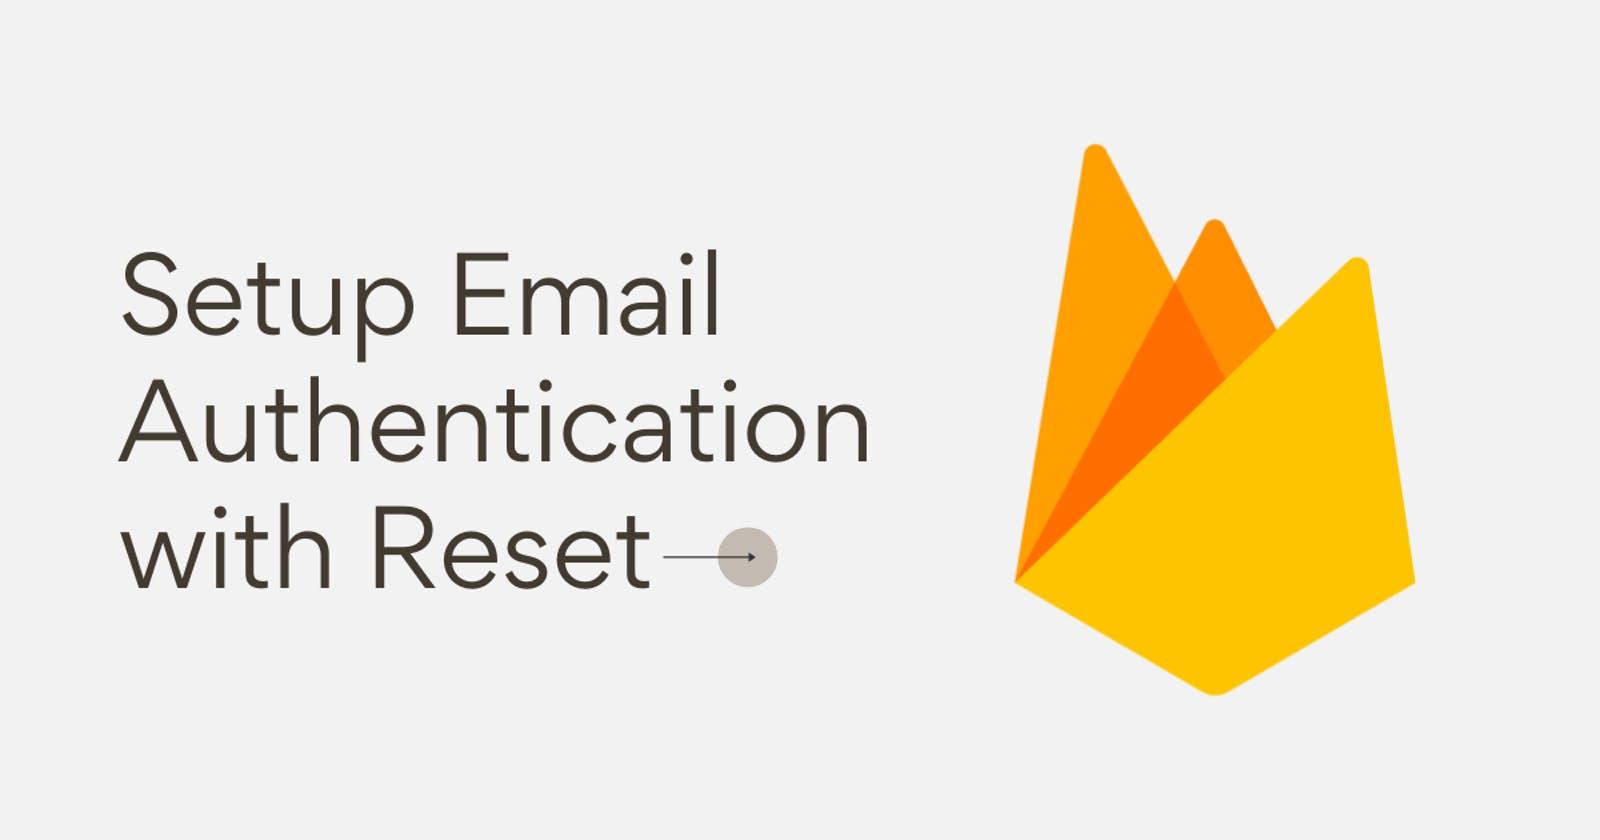 Setup Email Authentication with Reset option in React App 🚀